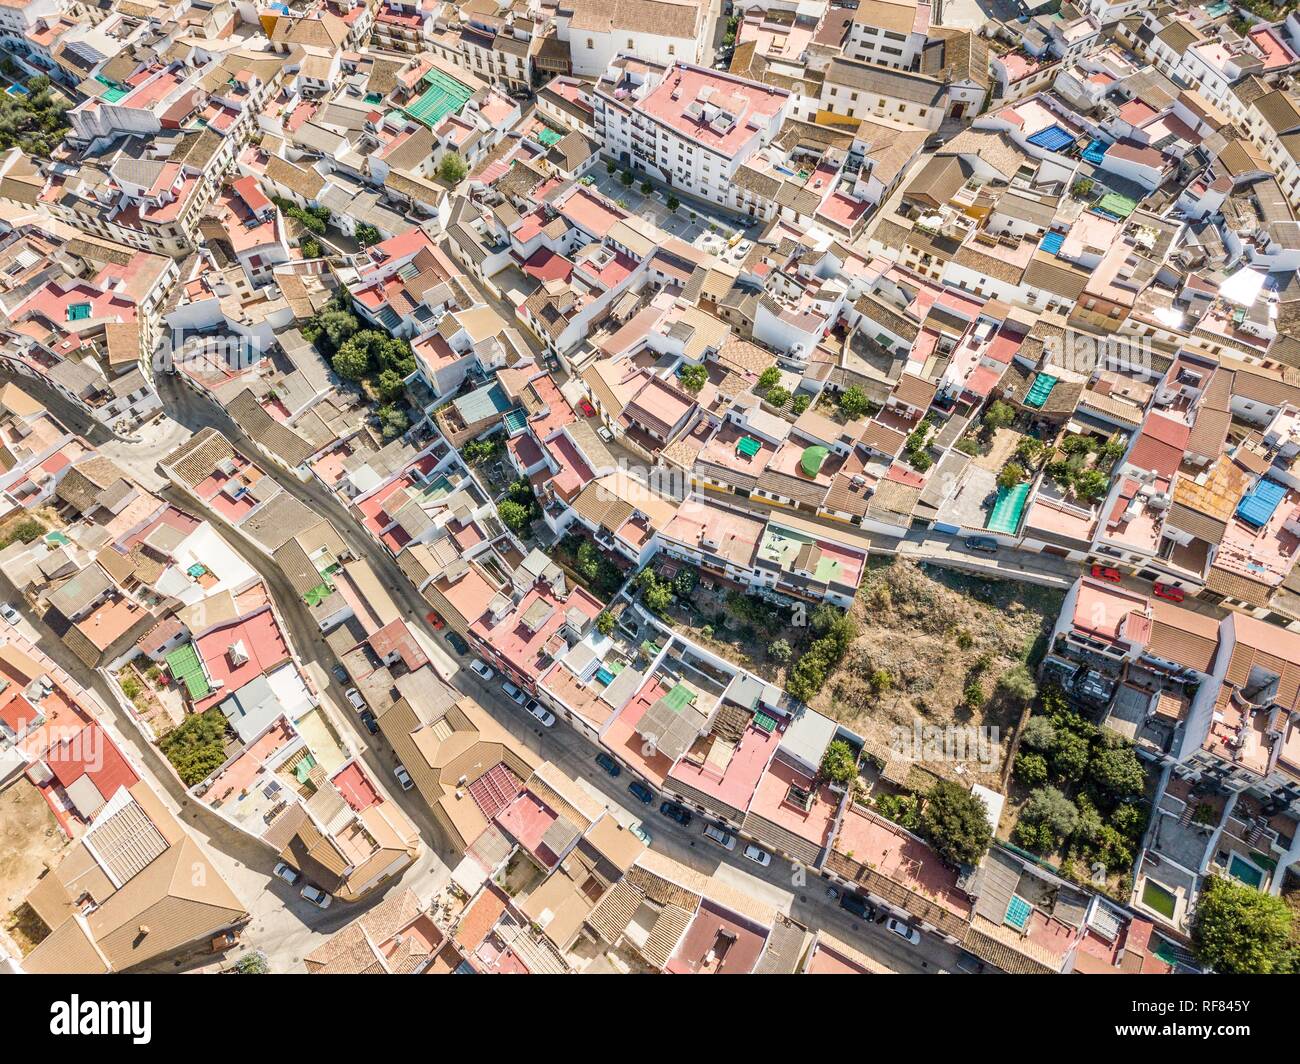 Architectural pattern of little Spanish town, drone image, Almodovar del Rio, Andalusia, Spain Stock Photo